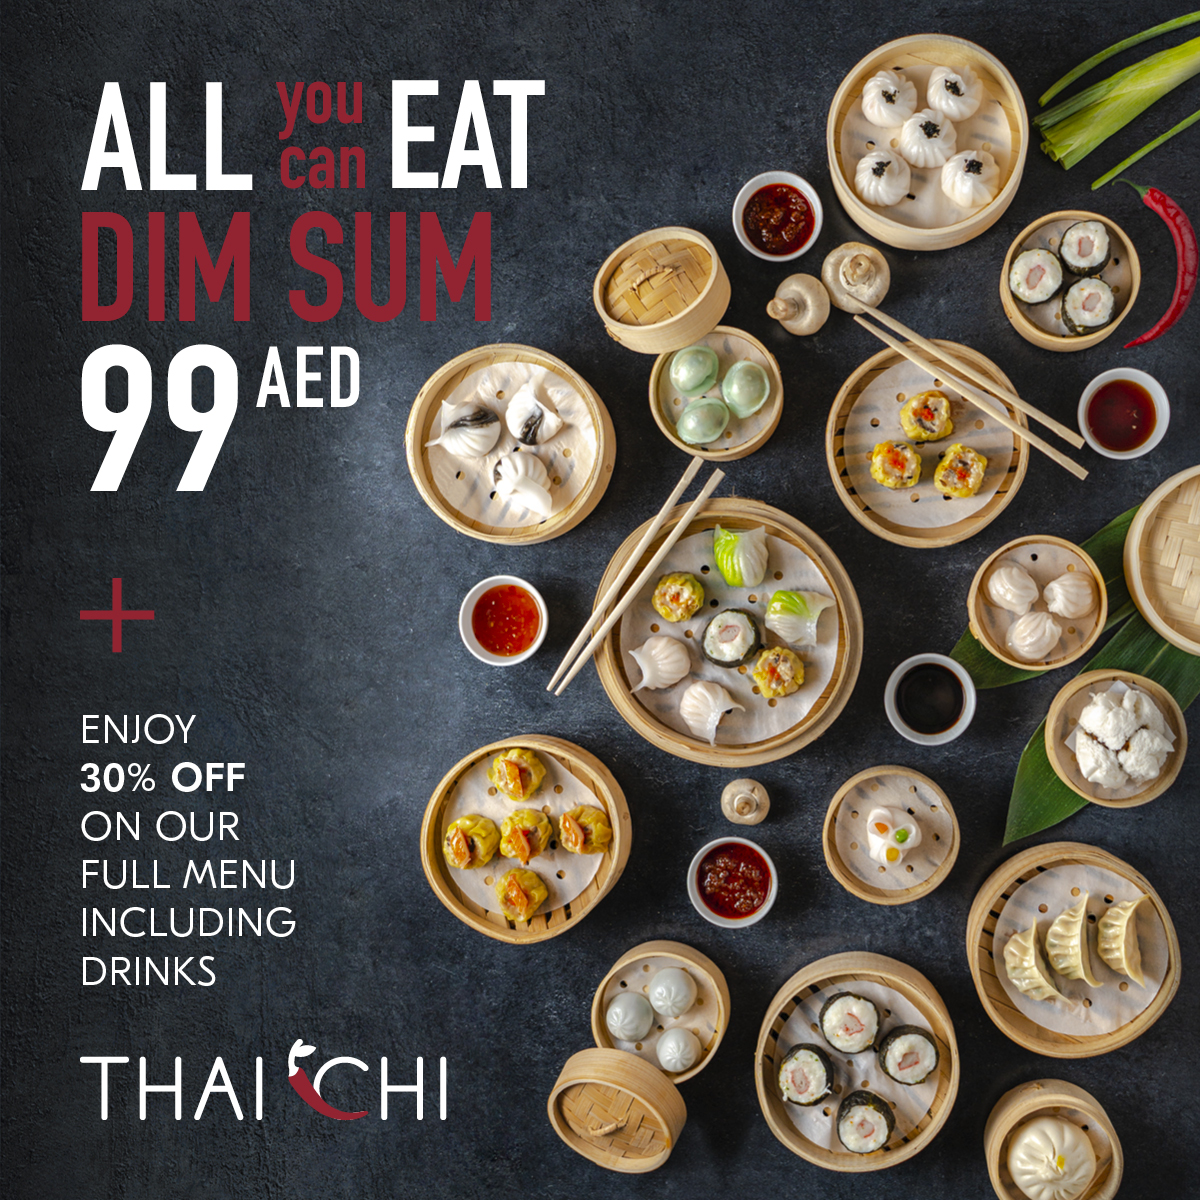 Thai Chi Dimsums Offer Post